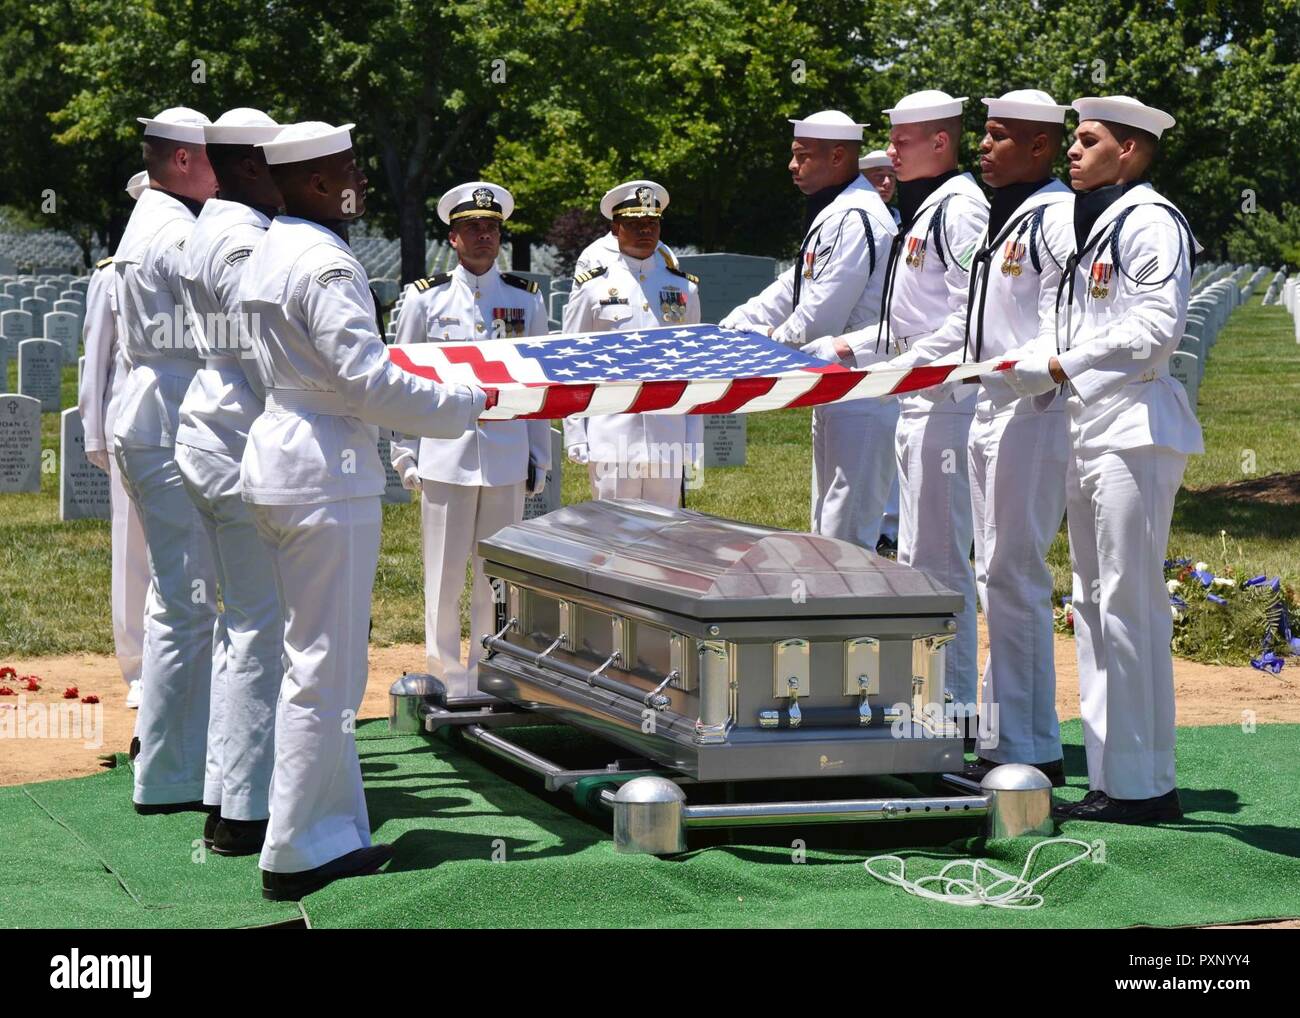 Navy Pharmacist’s Mate 3rd Class Howard P. Brisbane, 21, of New Orleans, Louisiana, was buried June 9, 2017, in Arlington National Cemetery, near Washington, D.C. In November 1943, Brisbane was assigned to Headquarters Company, 2nd Battalion, 8th Marines, 2nd Marine Division, which landed against stiff Japanese resistance on the small island of Betio in the Tarawa Atoll of the Gilbert Islands, in an attempt to secure the island. Over several days of intense fighting at Tarawa, approximately 1,000 Marines and Sailors were killed and more than 2,000 were wounded, but the Japanese were virtually  Stock Photo